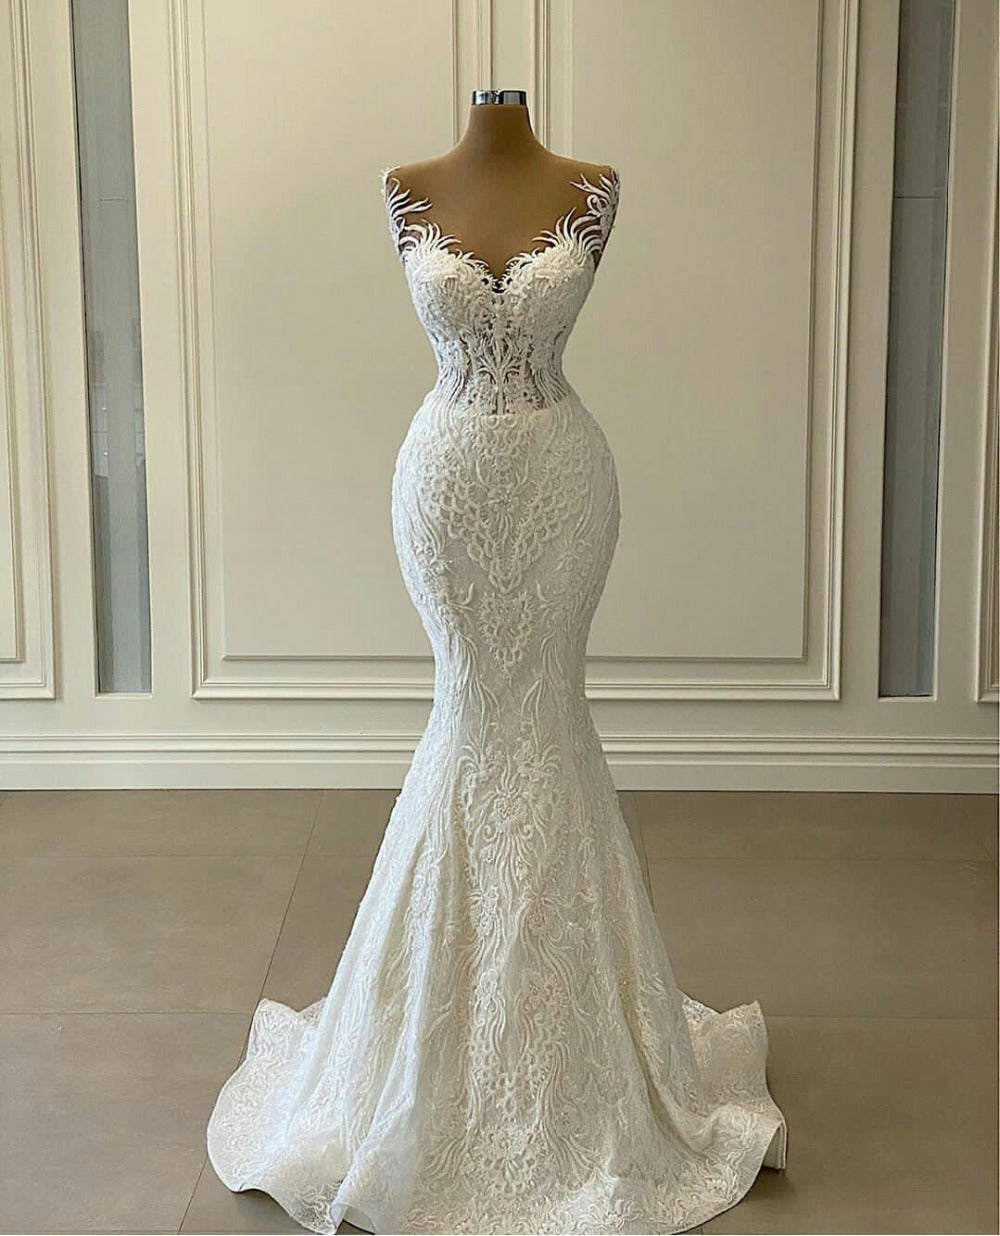 Luxurious Mermaid Wedding Dresses Bridal Gowns With Detachable Train Sheer Jewel Neck Lace Appliques SA1070